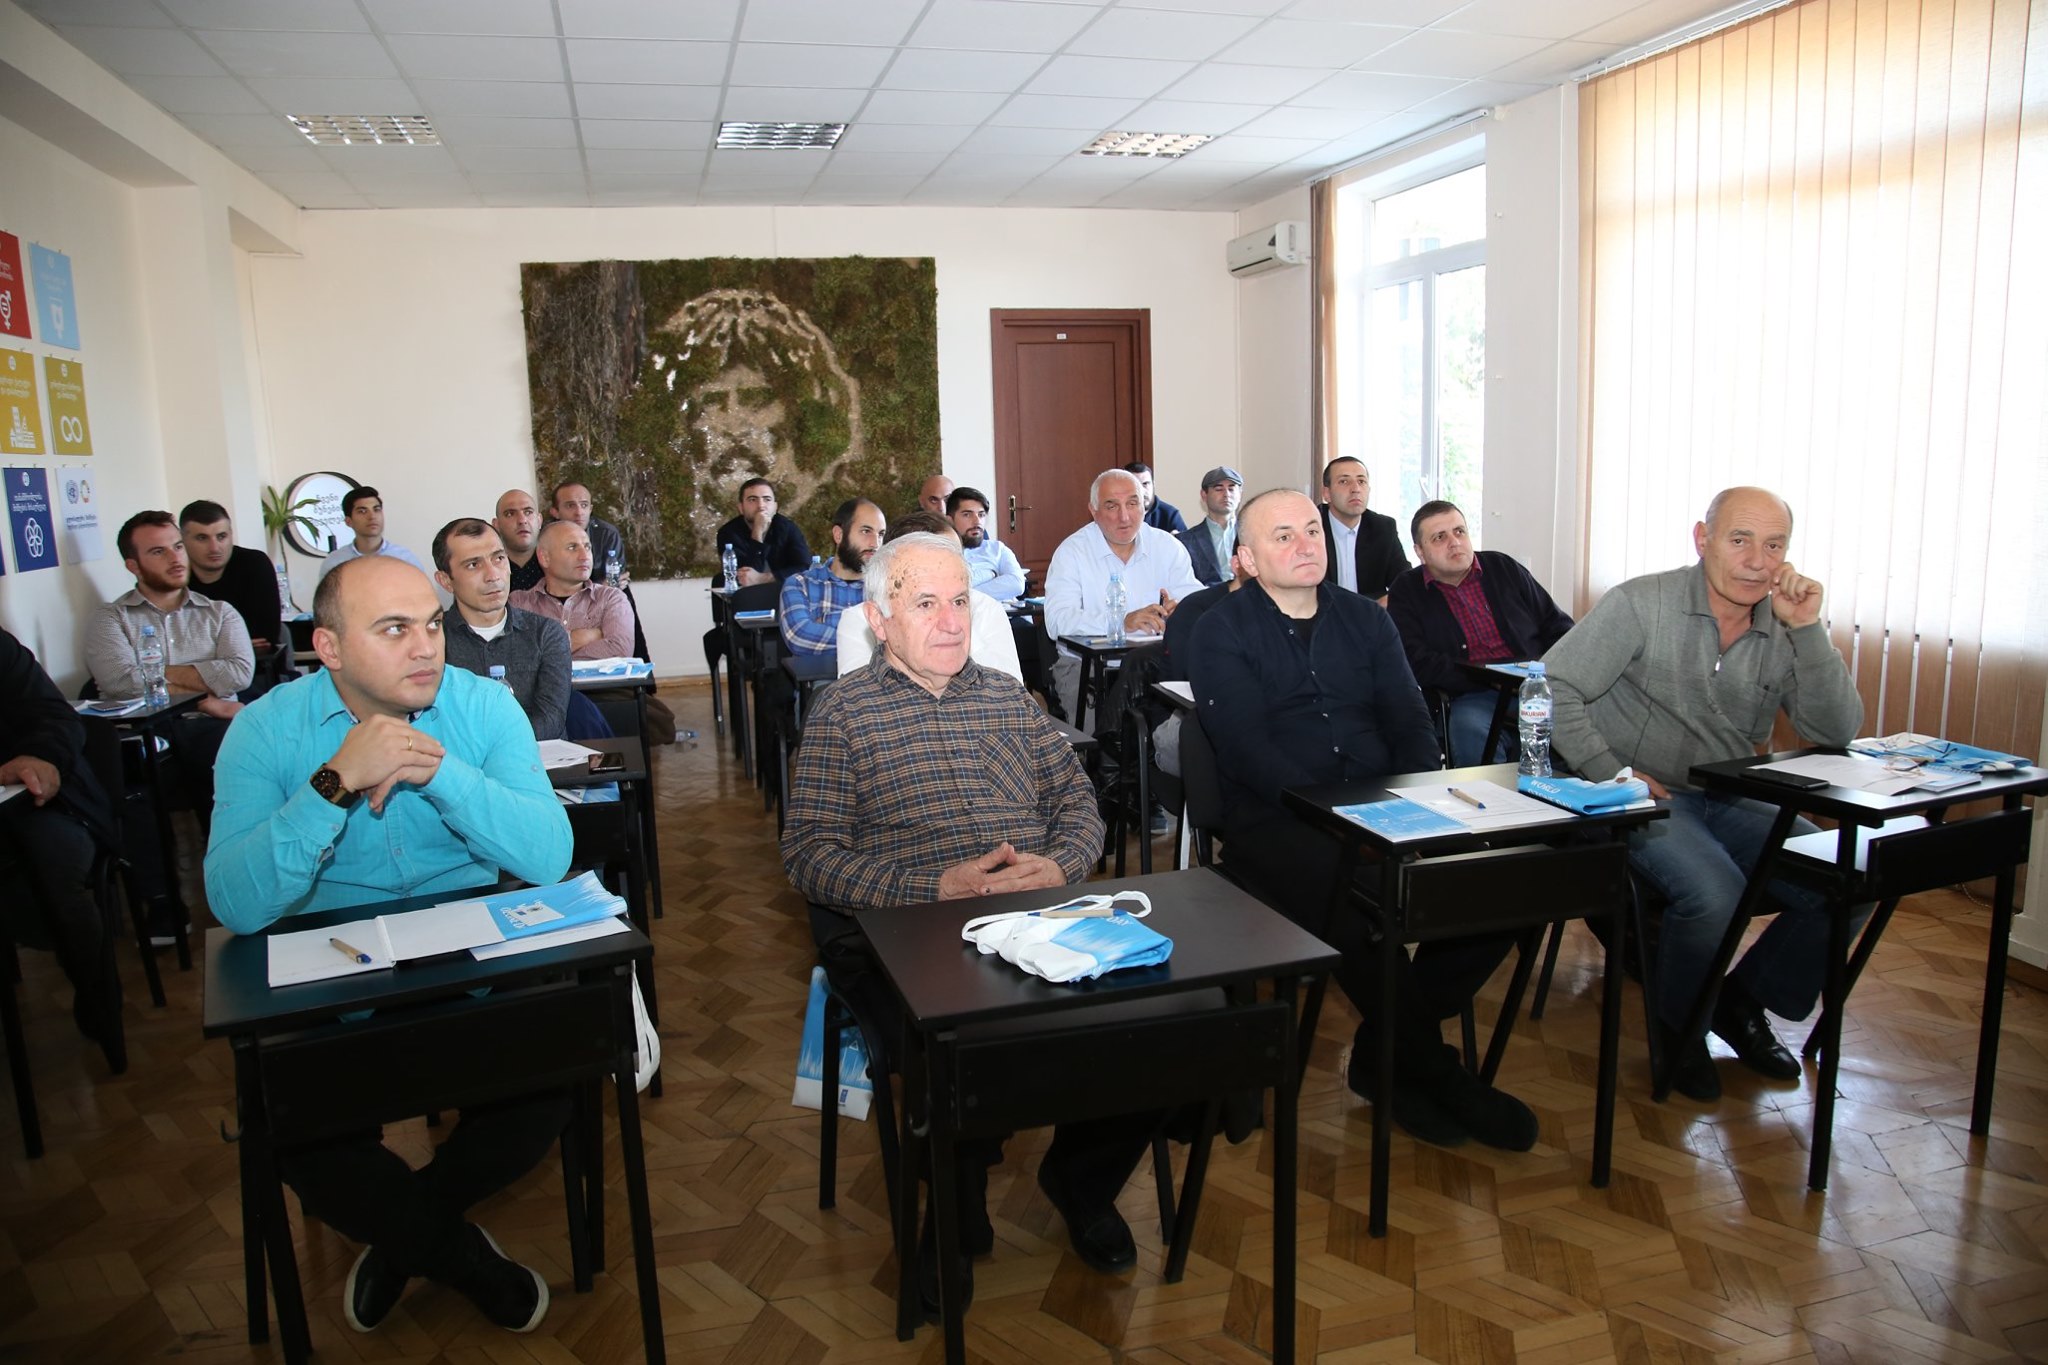 A training session was held for refrigeration equipment technicians